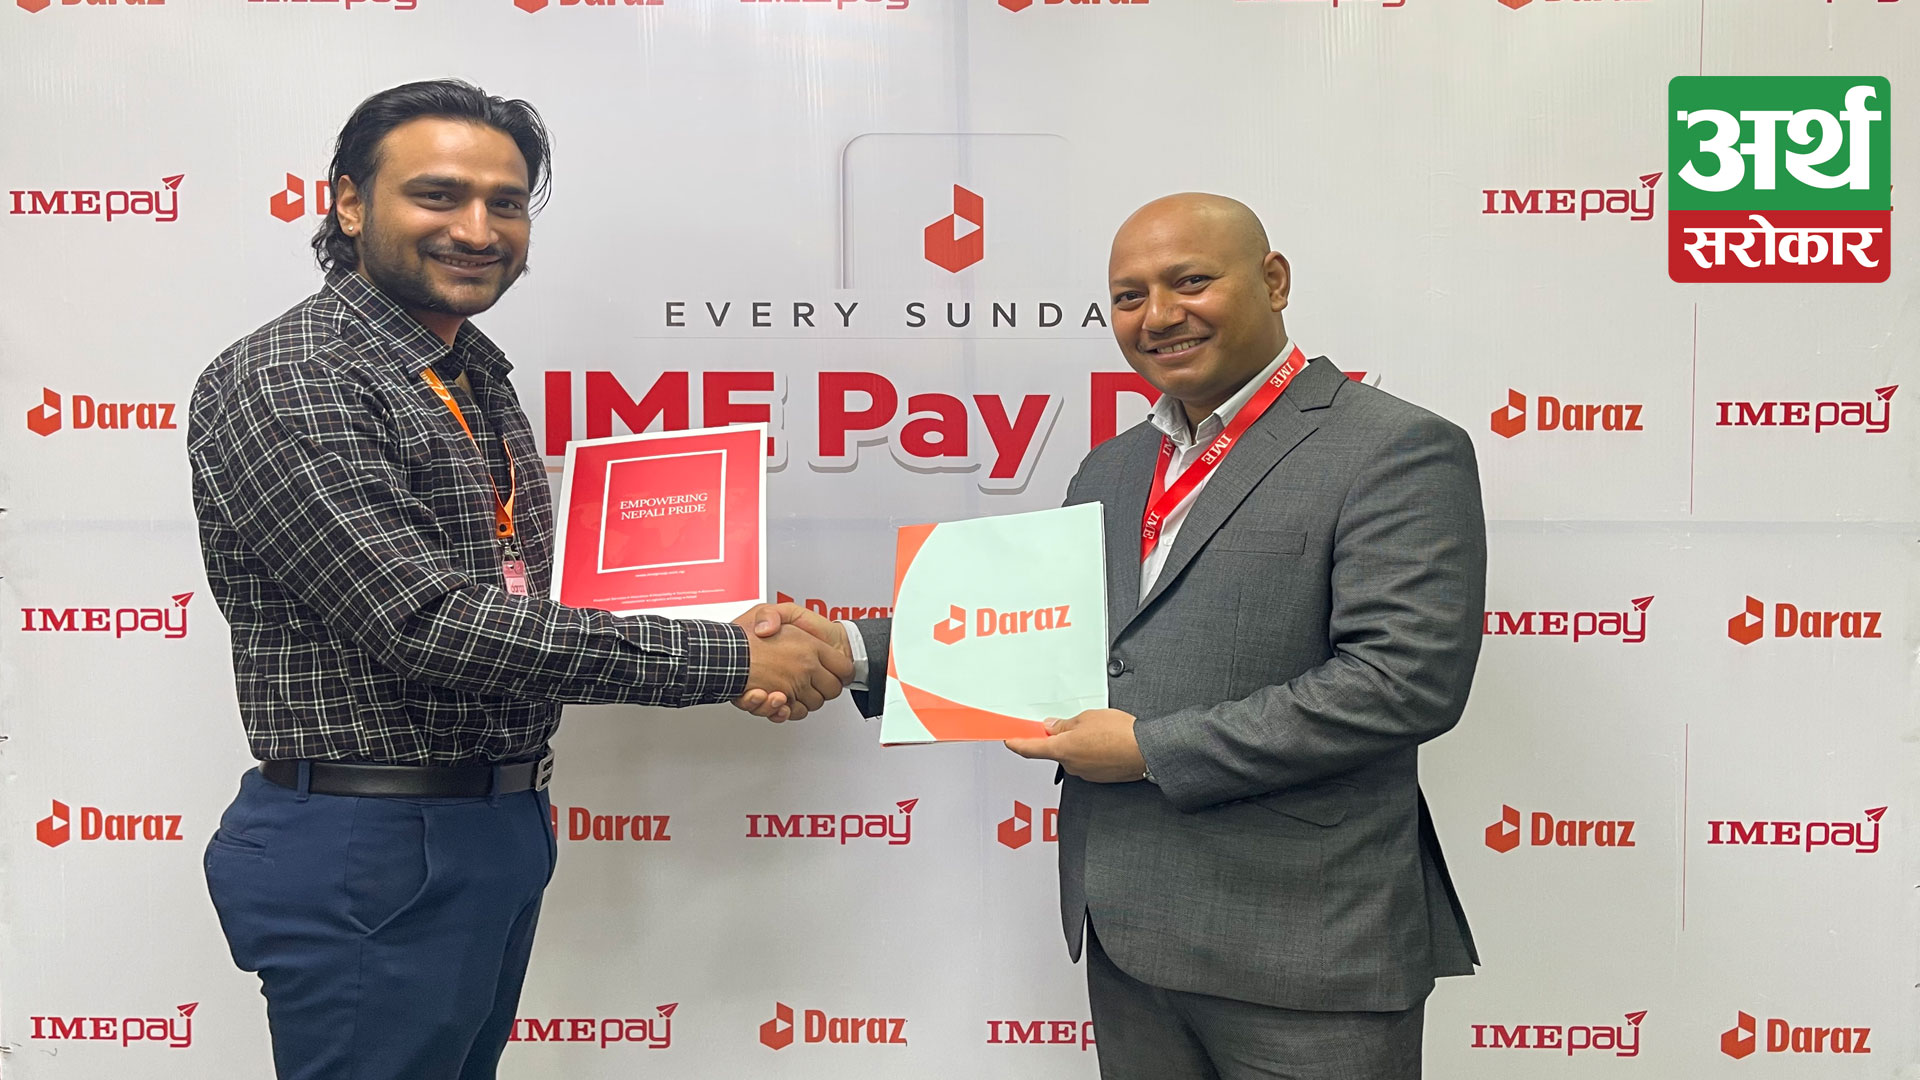 IME Pay & Daraz Jointly Announce Special Sunday Discounts